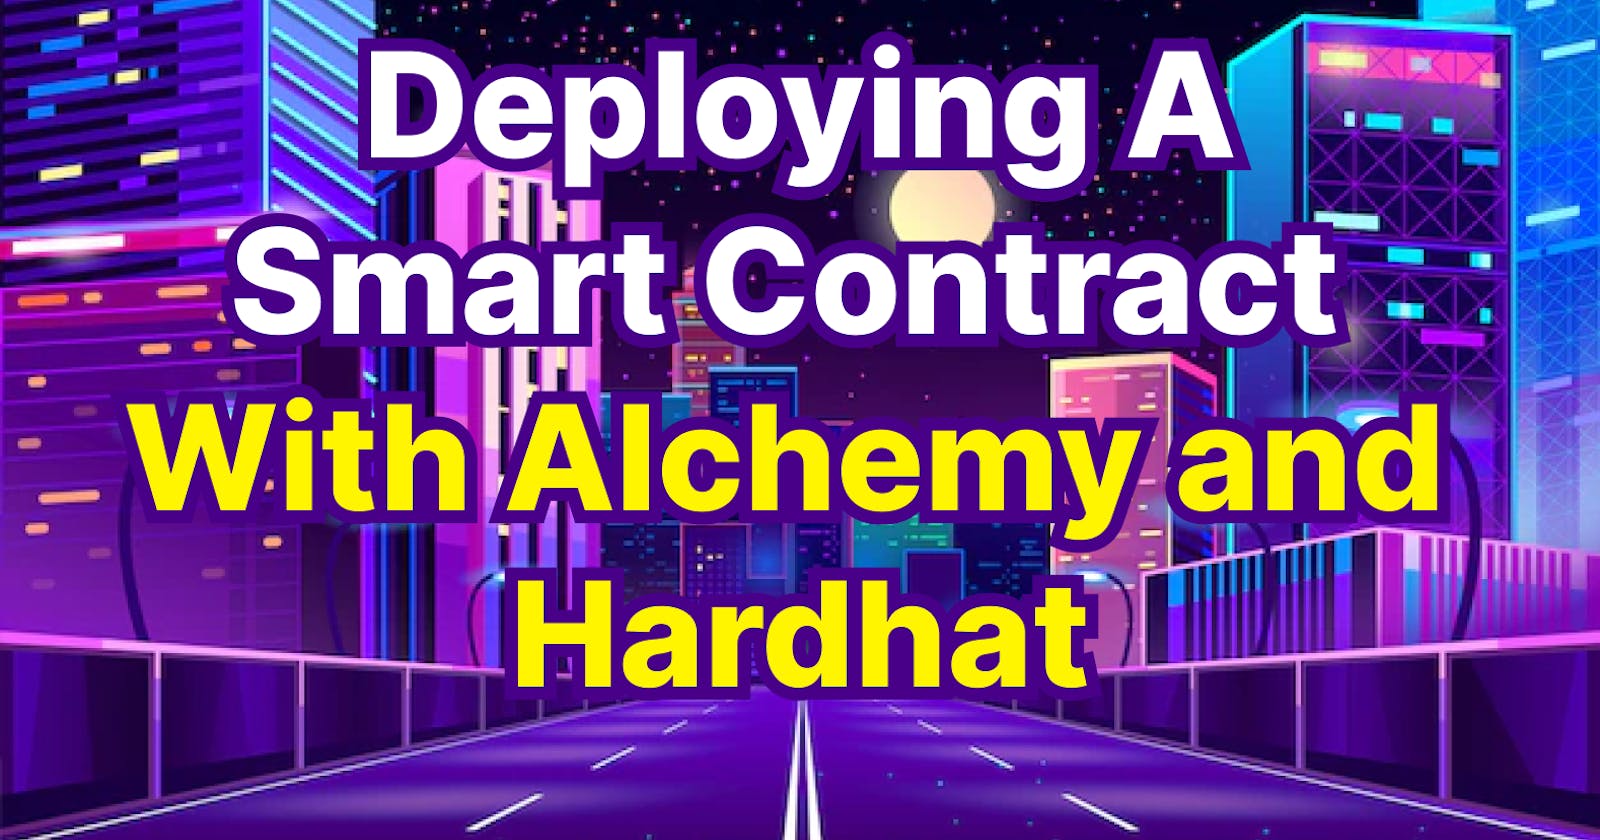 Setting up and Deploying a solidity smart contract to Ropsten testnet with Alchemy and Hardhat